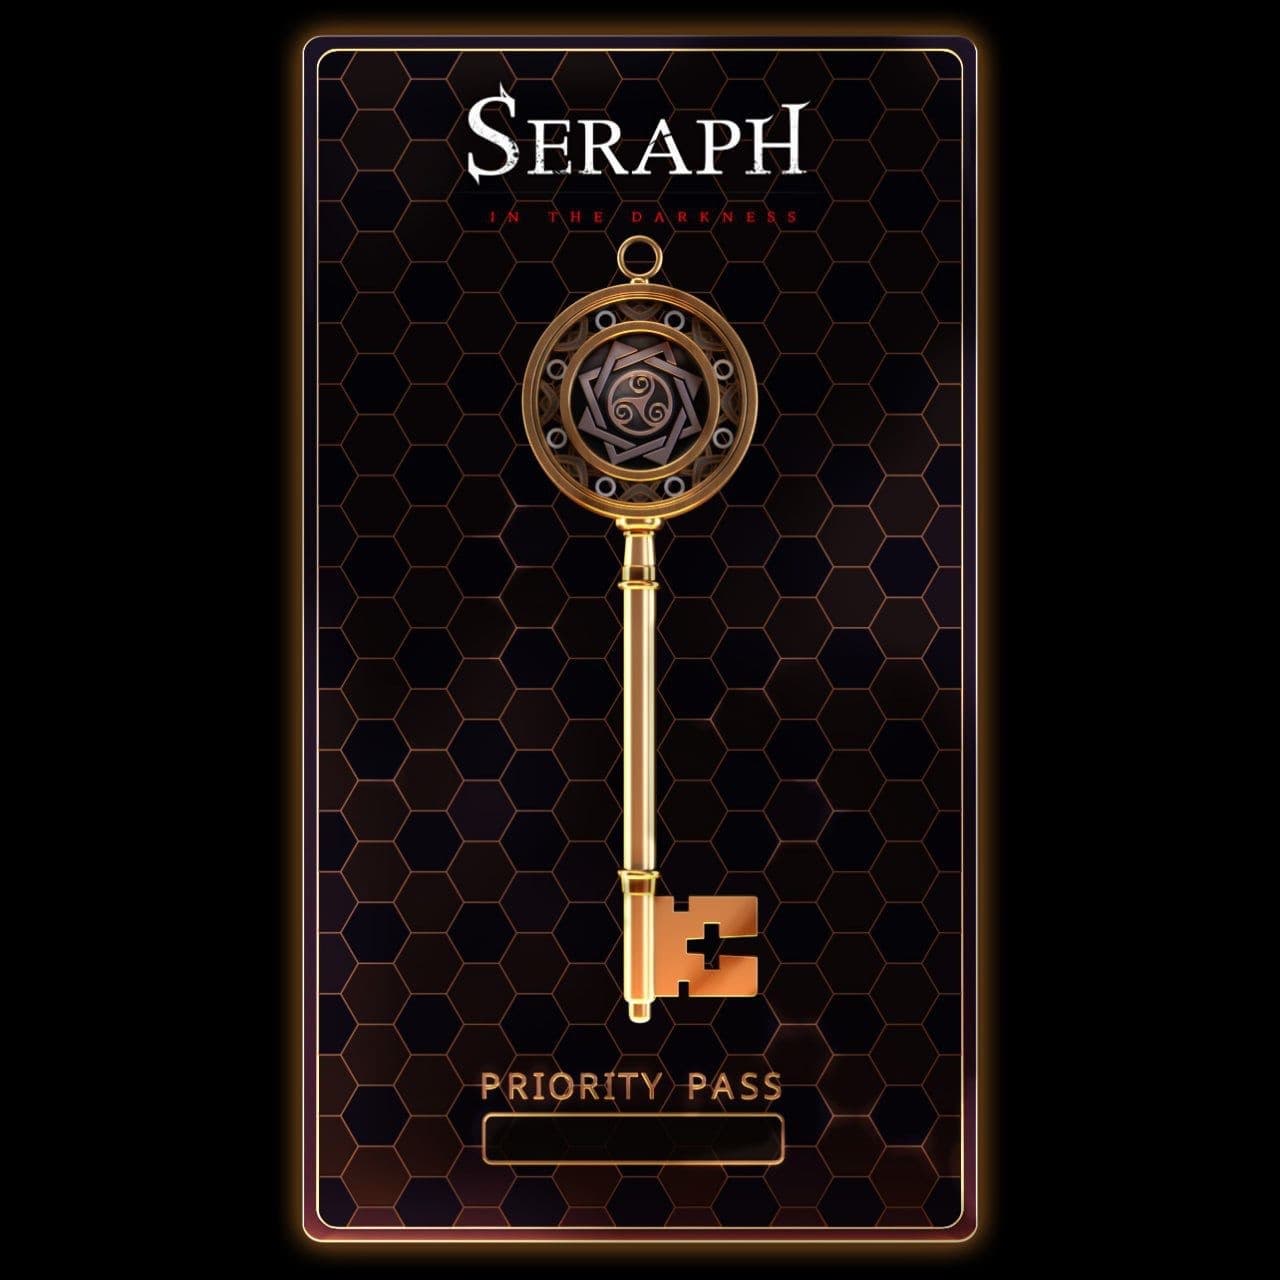 SERAPH: In the Darkness